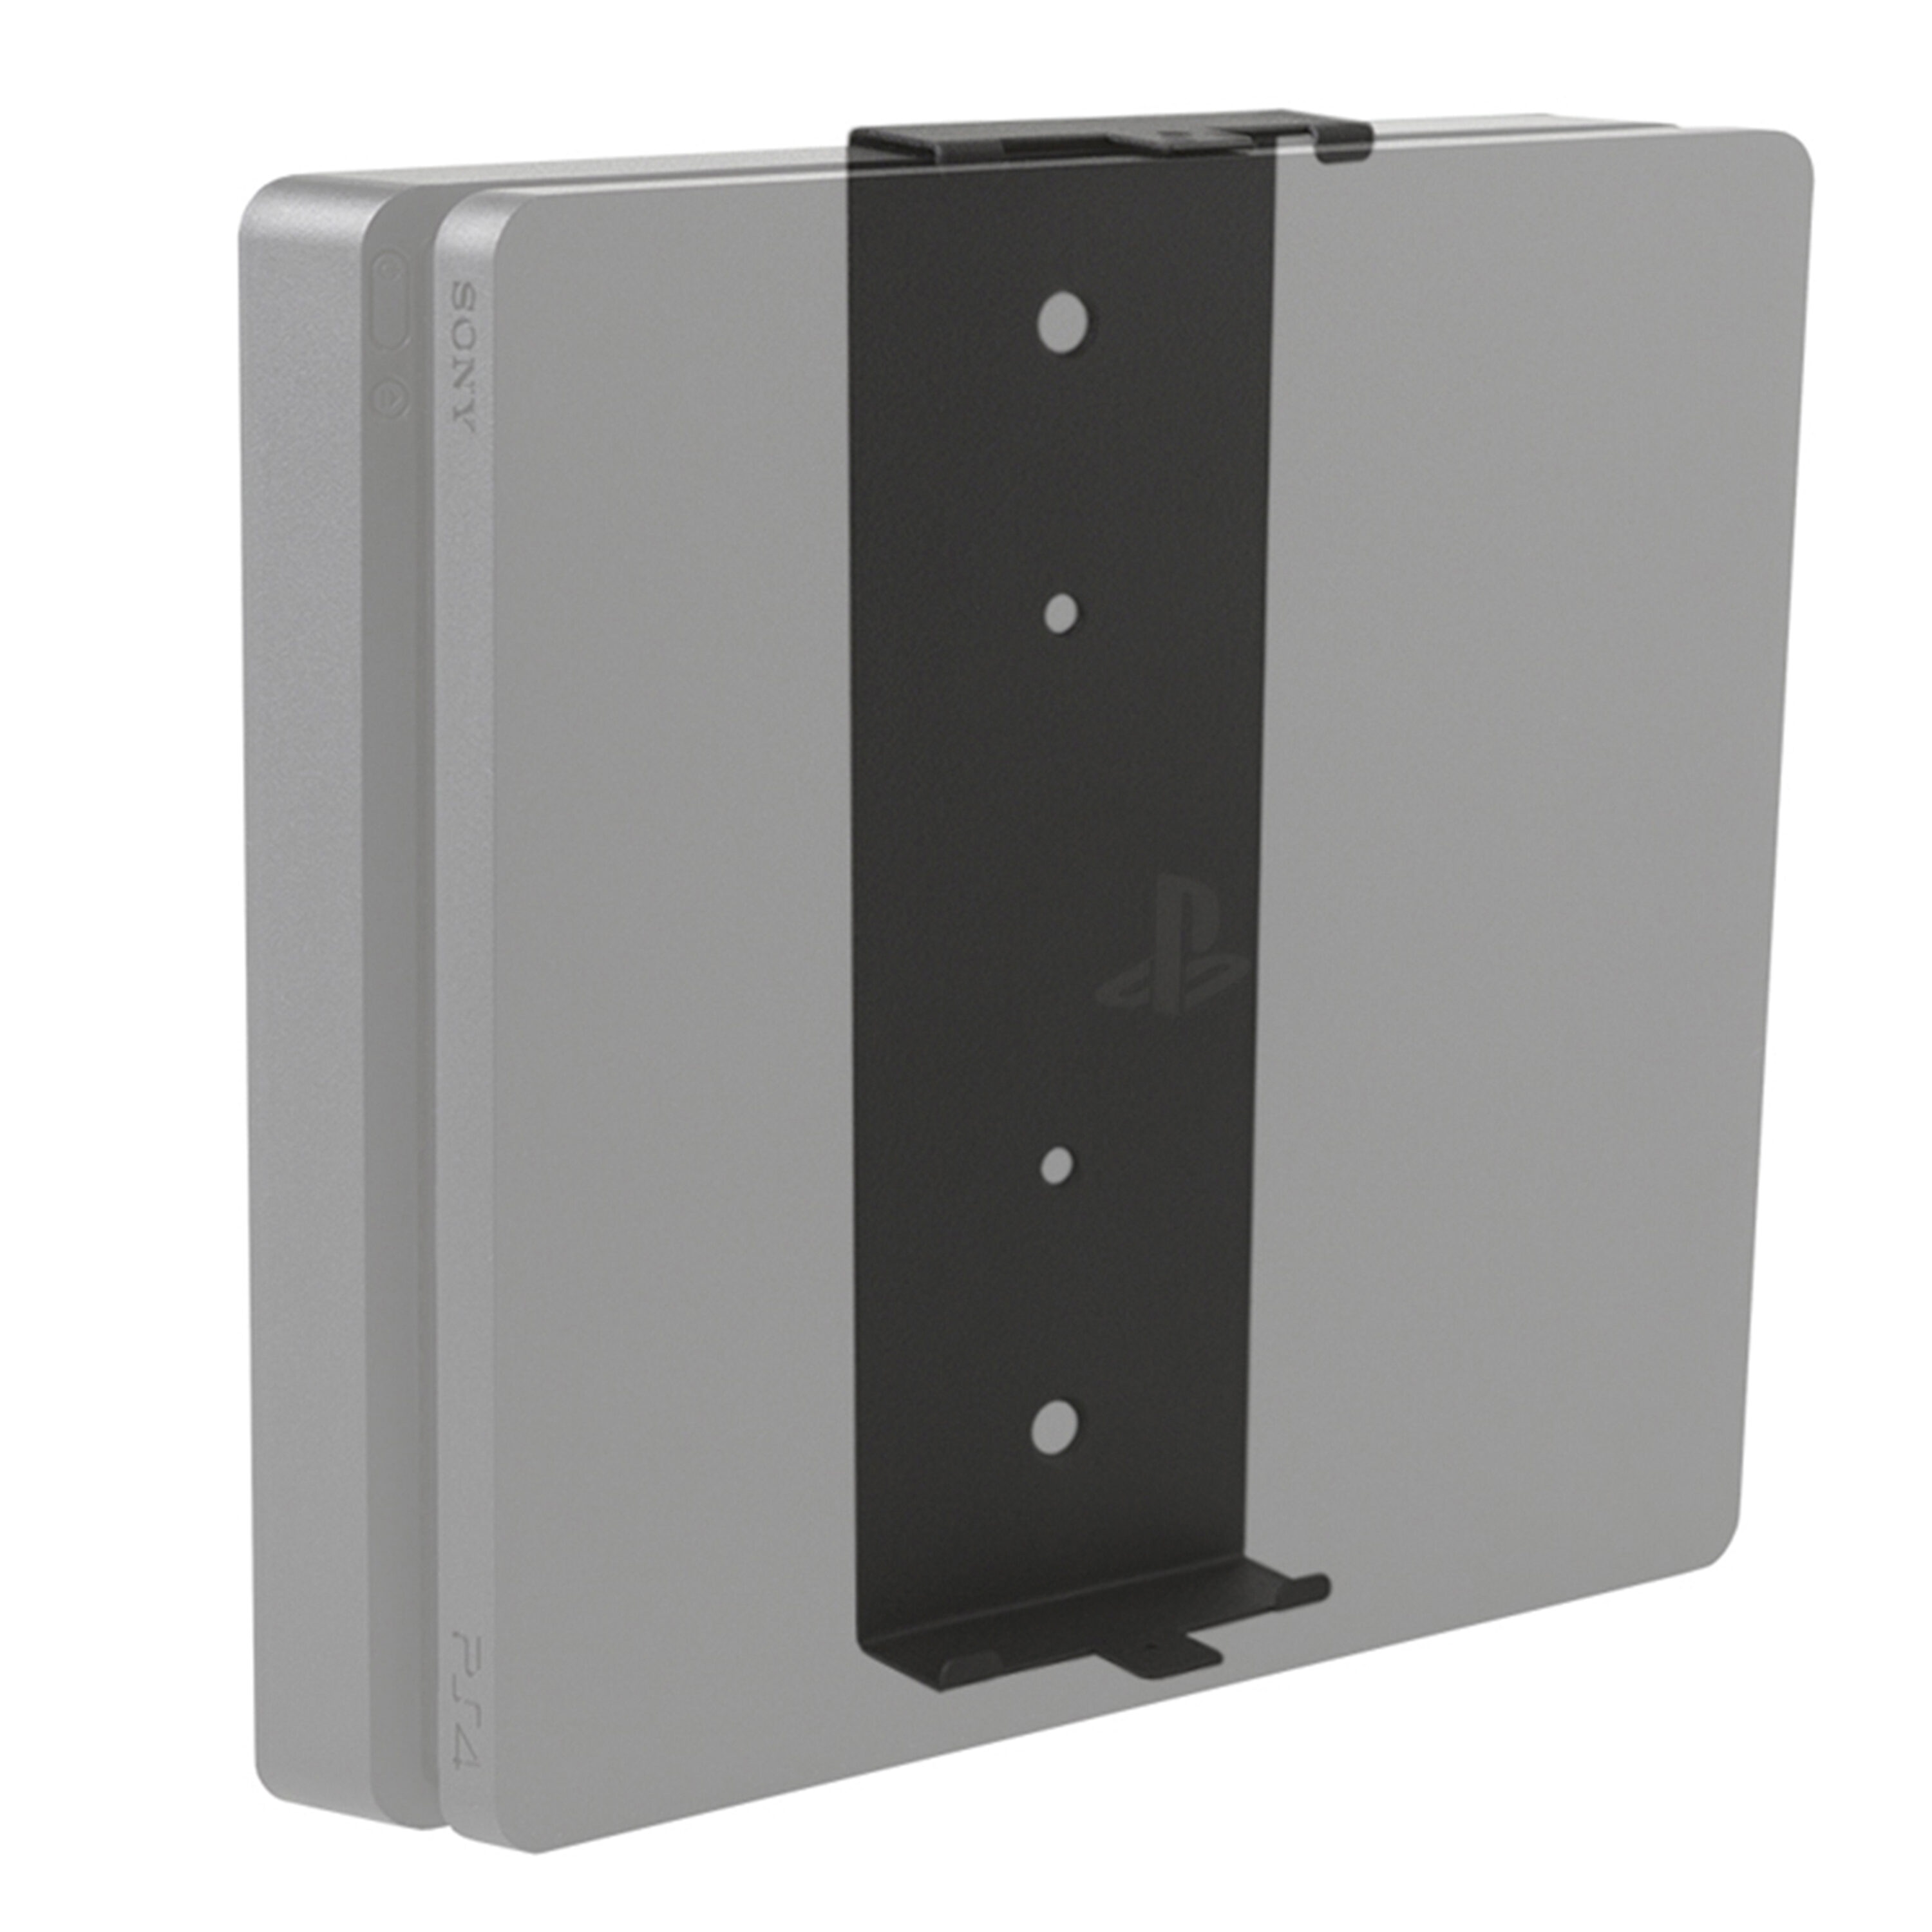 Mounts PS4 Slim Mount Black Powder Coat Console Mount in the Video Gaming Accessories at Lowes.com